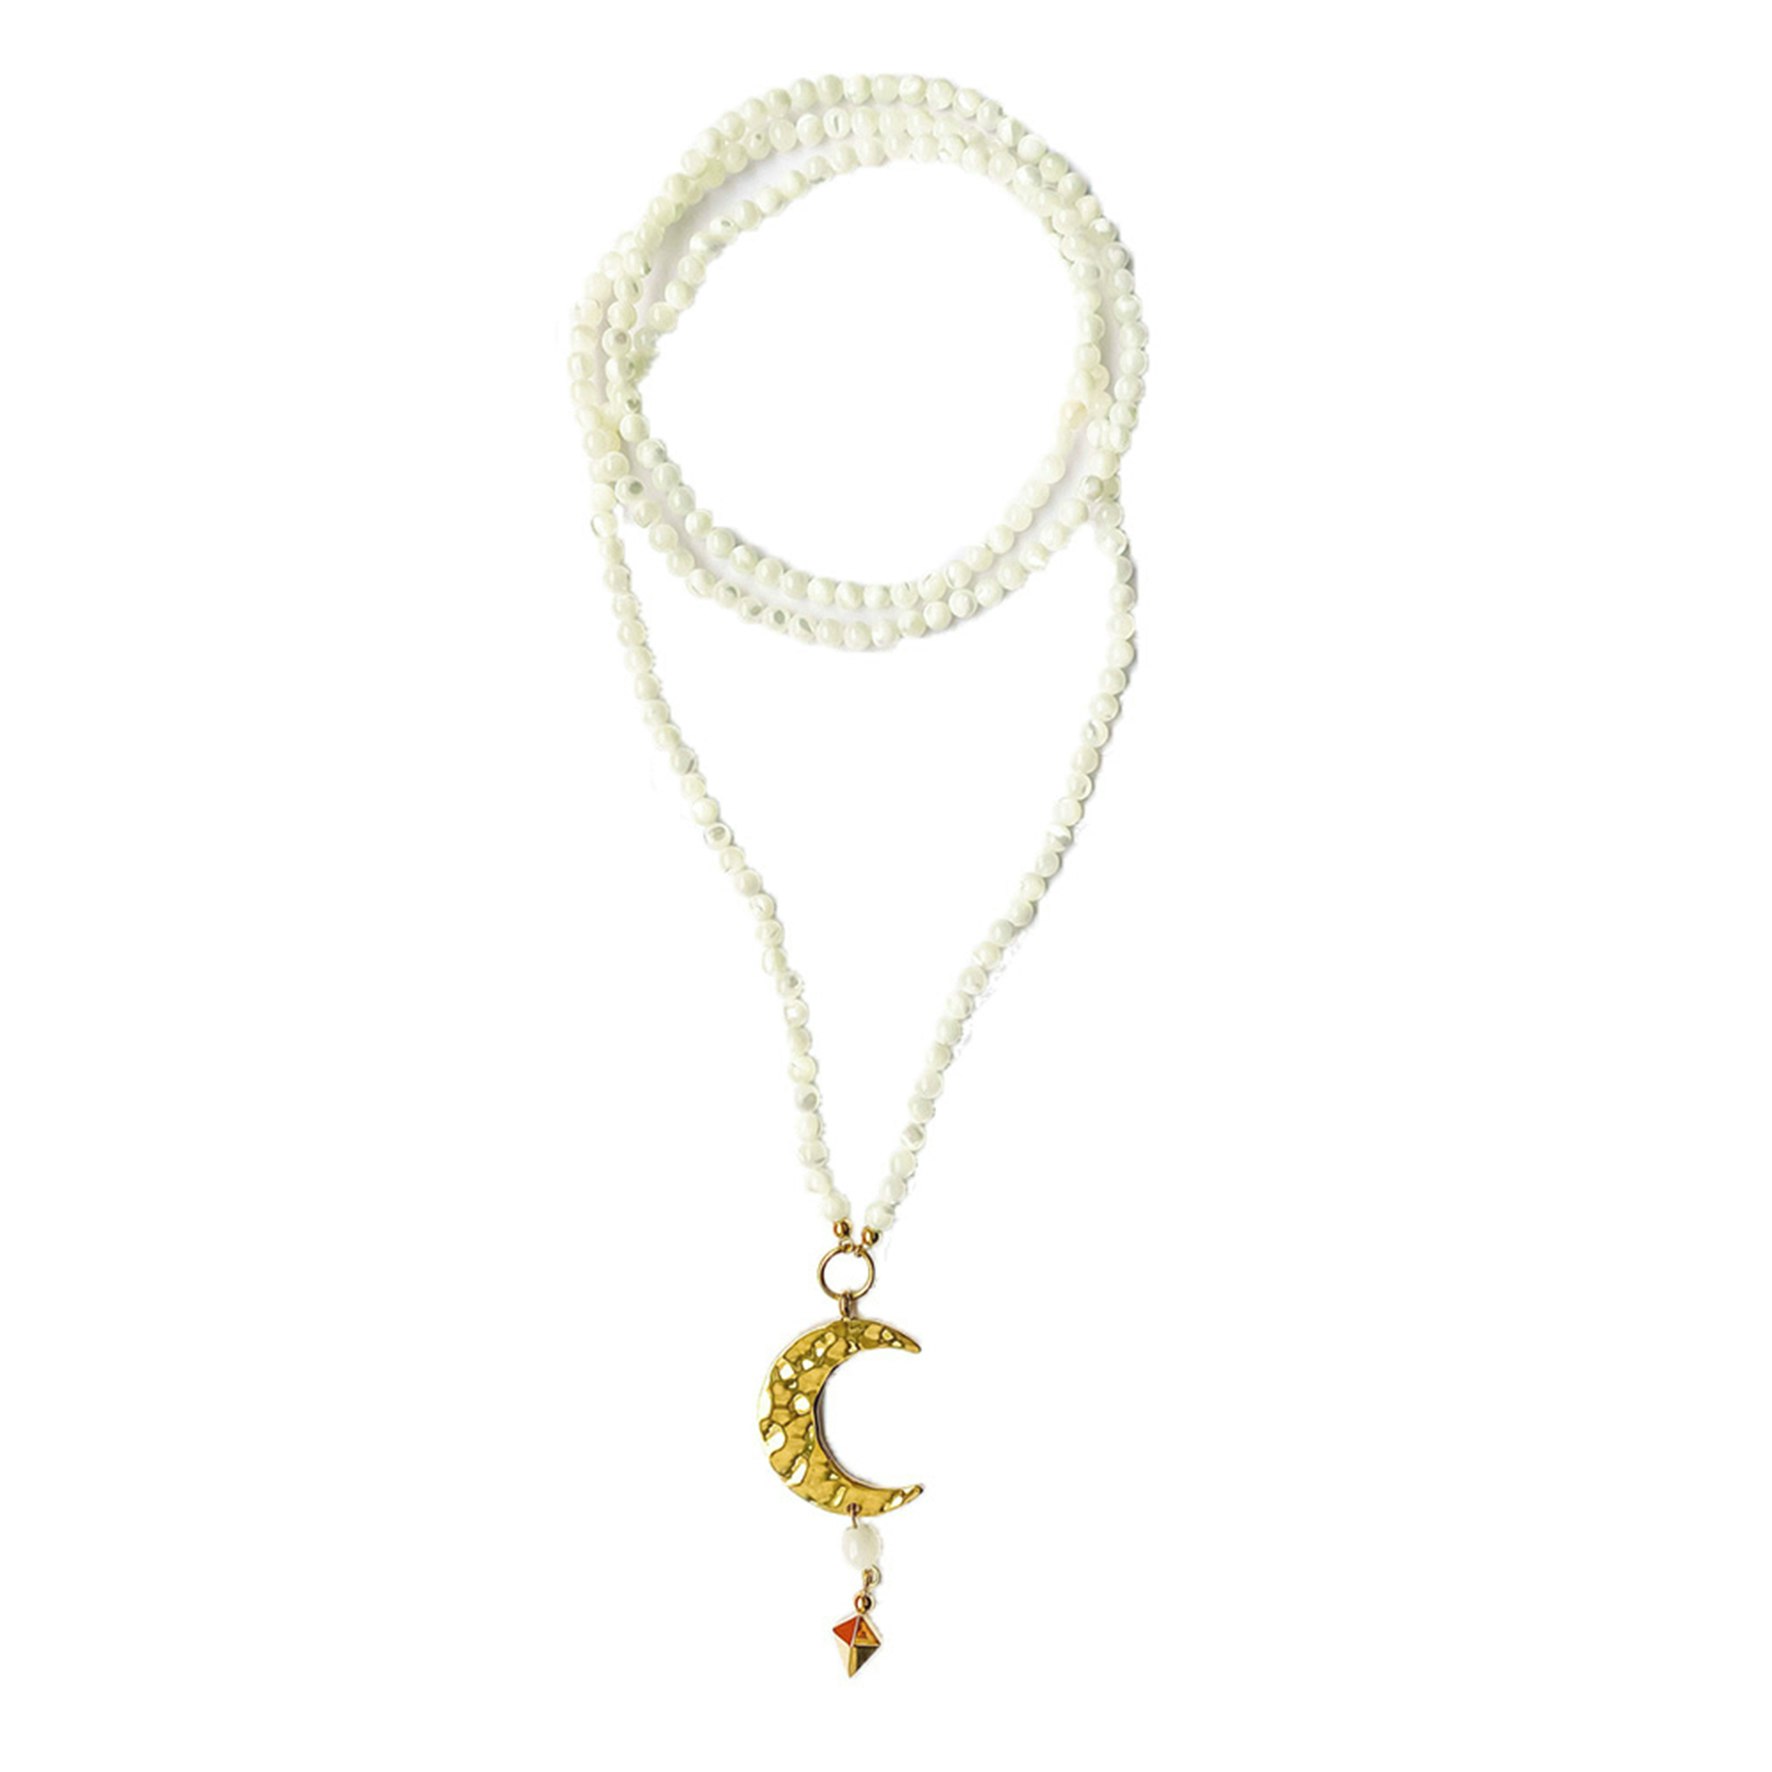 Mie Moltke Necklace With Marble Pearls from Izabel Camille in Goldplated Silver Sterling 925